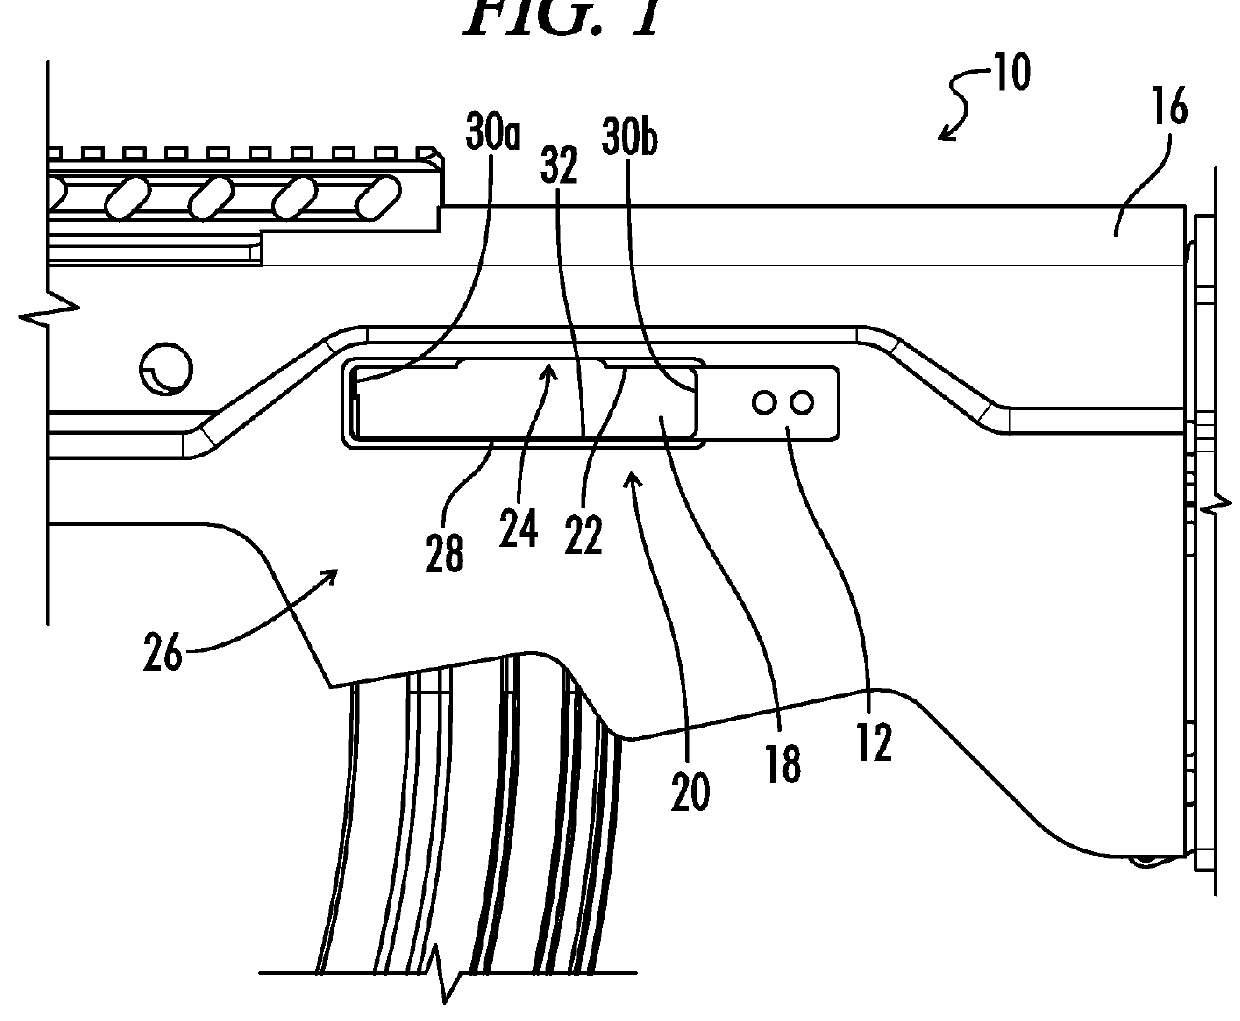 Ejection port cover for a firearm